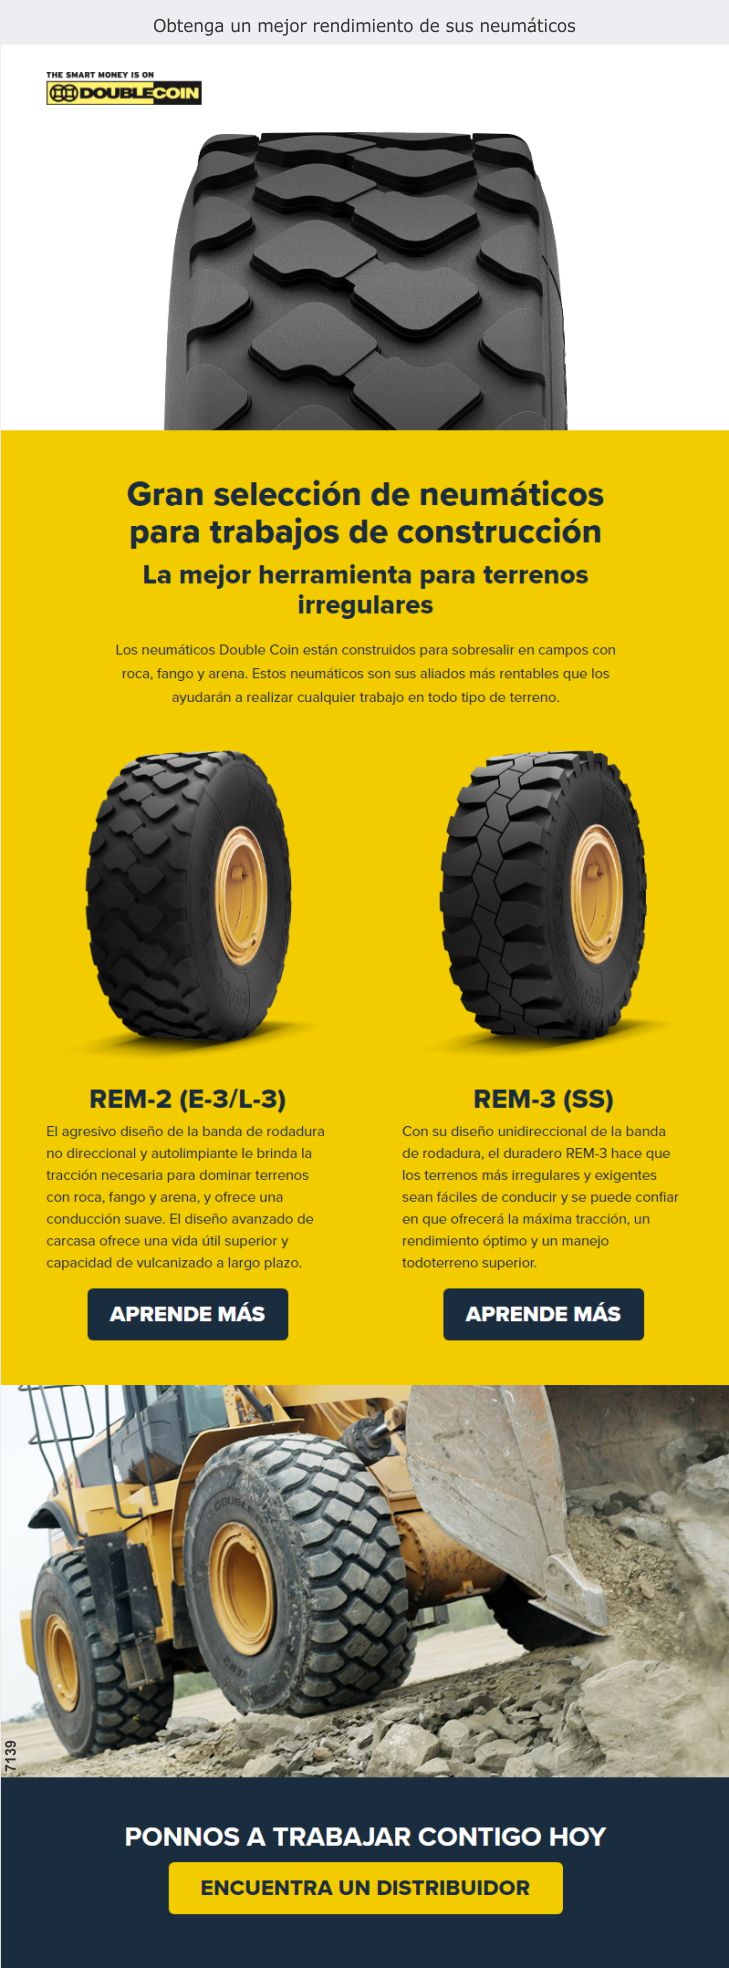 Double Coin brand OTR tires are heavy duty and built for severe requirements.